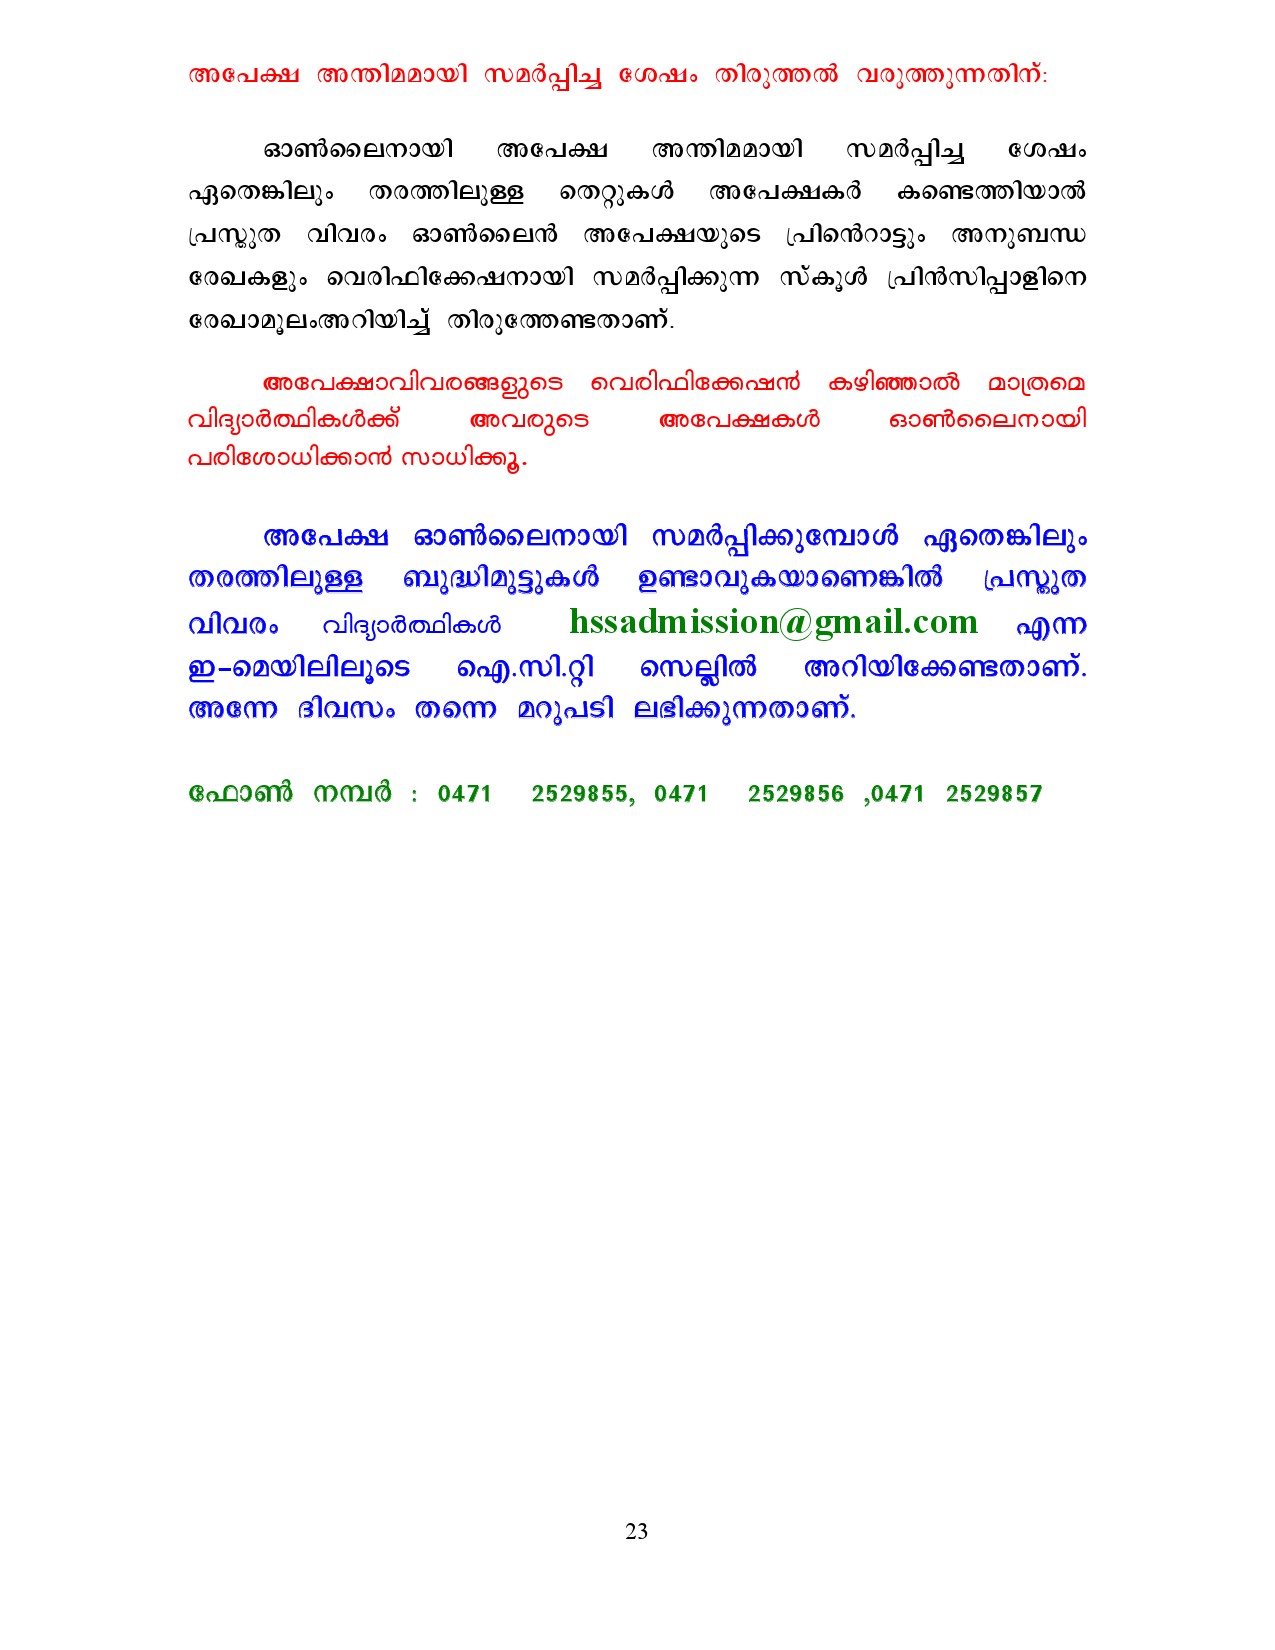 Higher Secondary School Online Application Manual in Malayalam - Notification Image 23